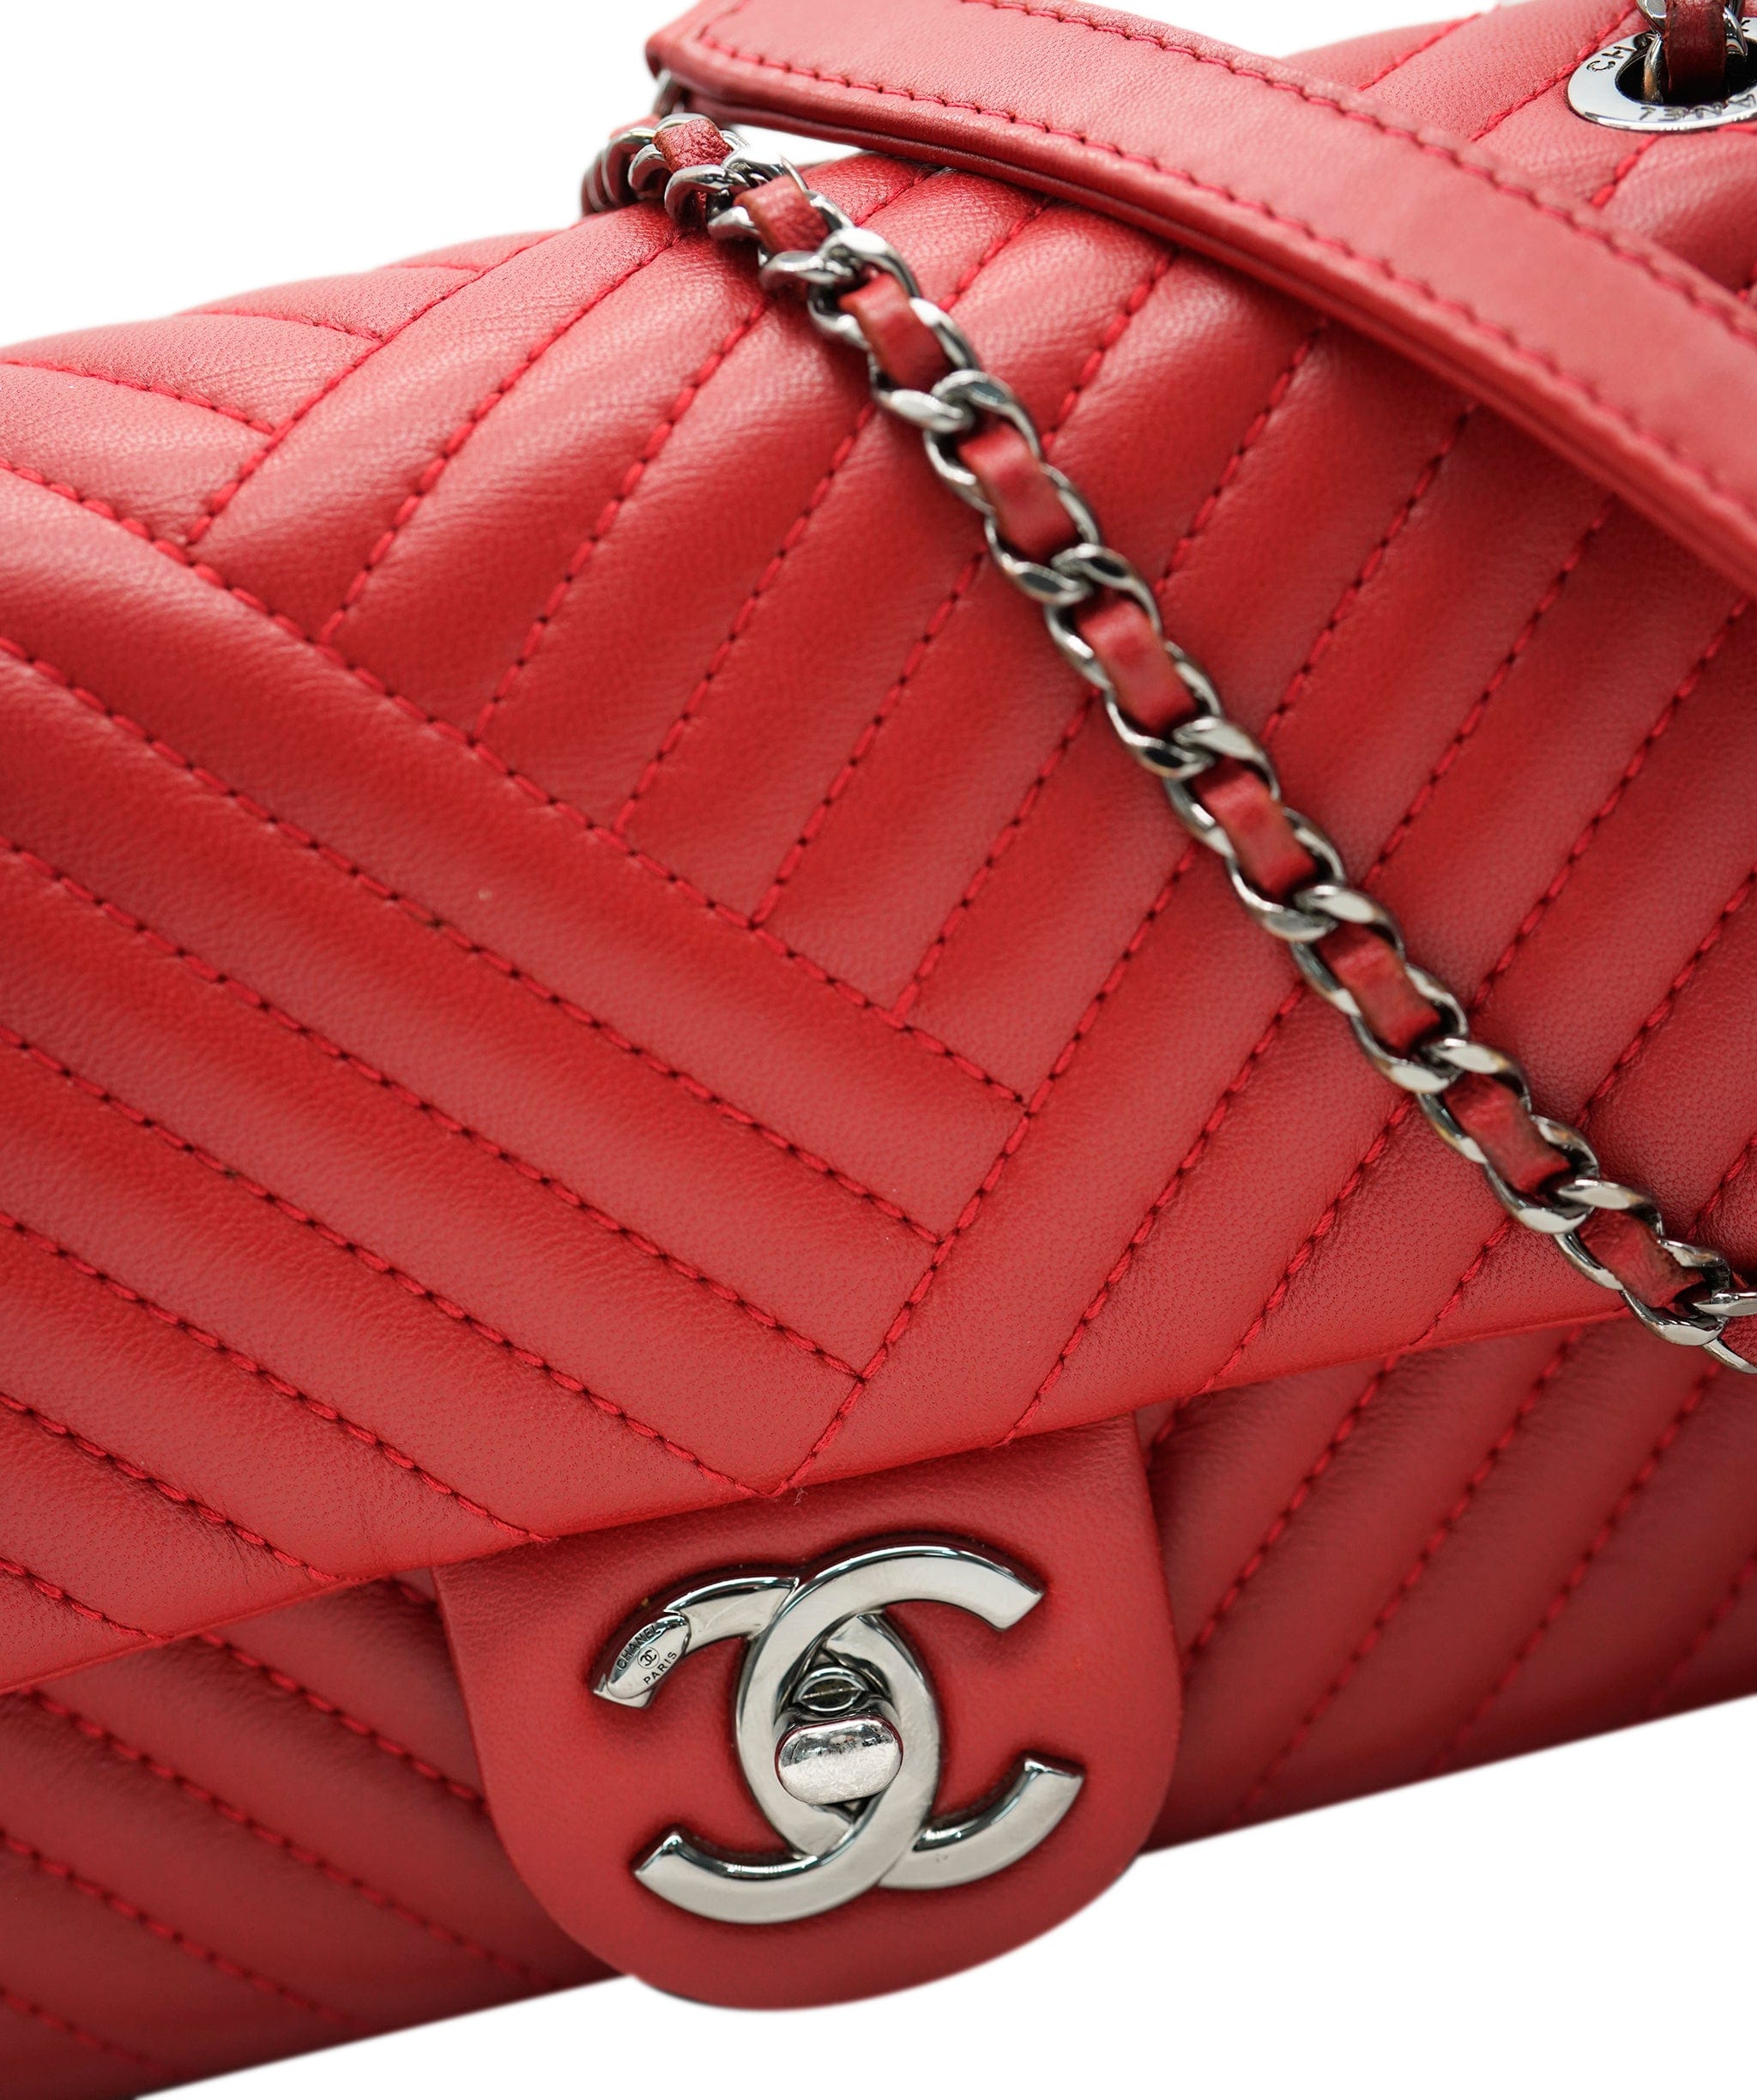 Chanel Chanel Red Lambskin Small CC Crossing Single Flap ABC0779